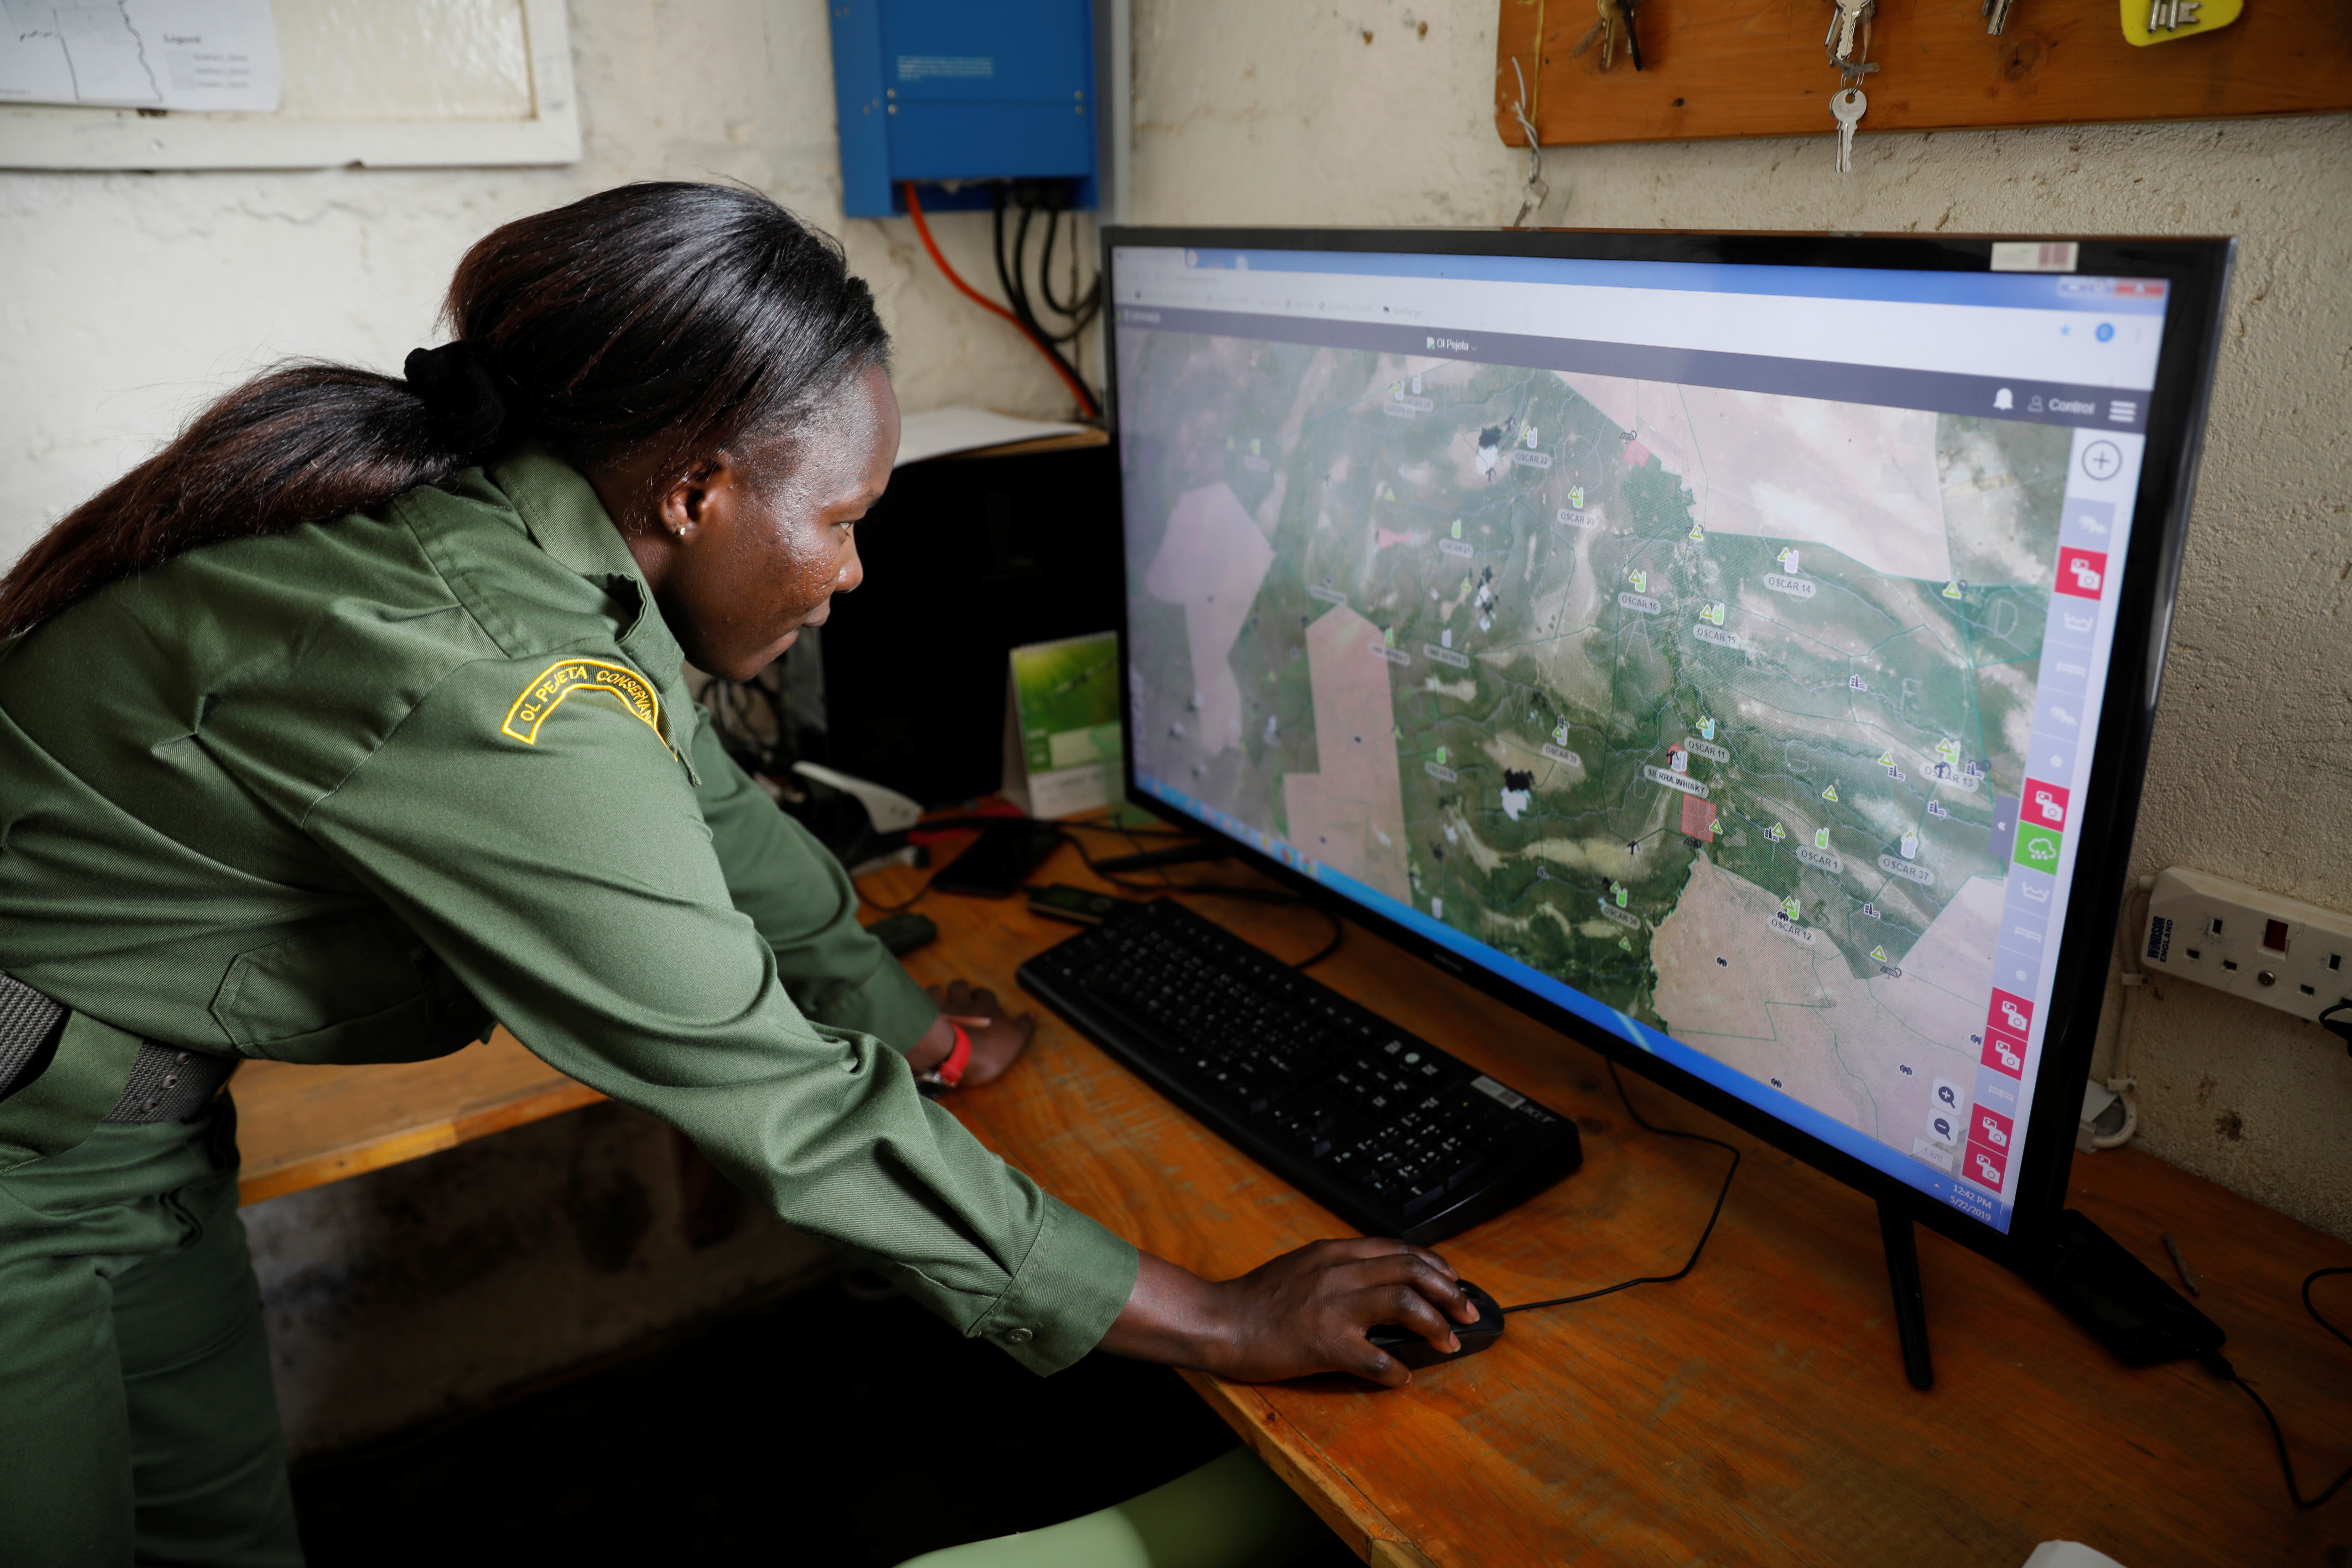 A ranger displays using the EarthRanger conservation platform at the Ol Pejeta Conservancy in Laikipia national park near Nanyuki, Kenya, May 22, 2019. Picture taken May 22, 2019. REUTERS/Baz Ratner